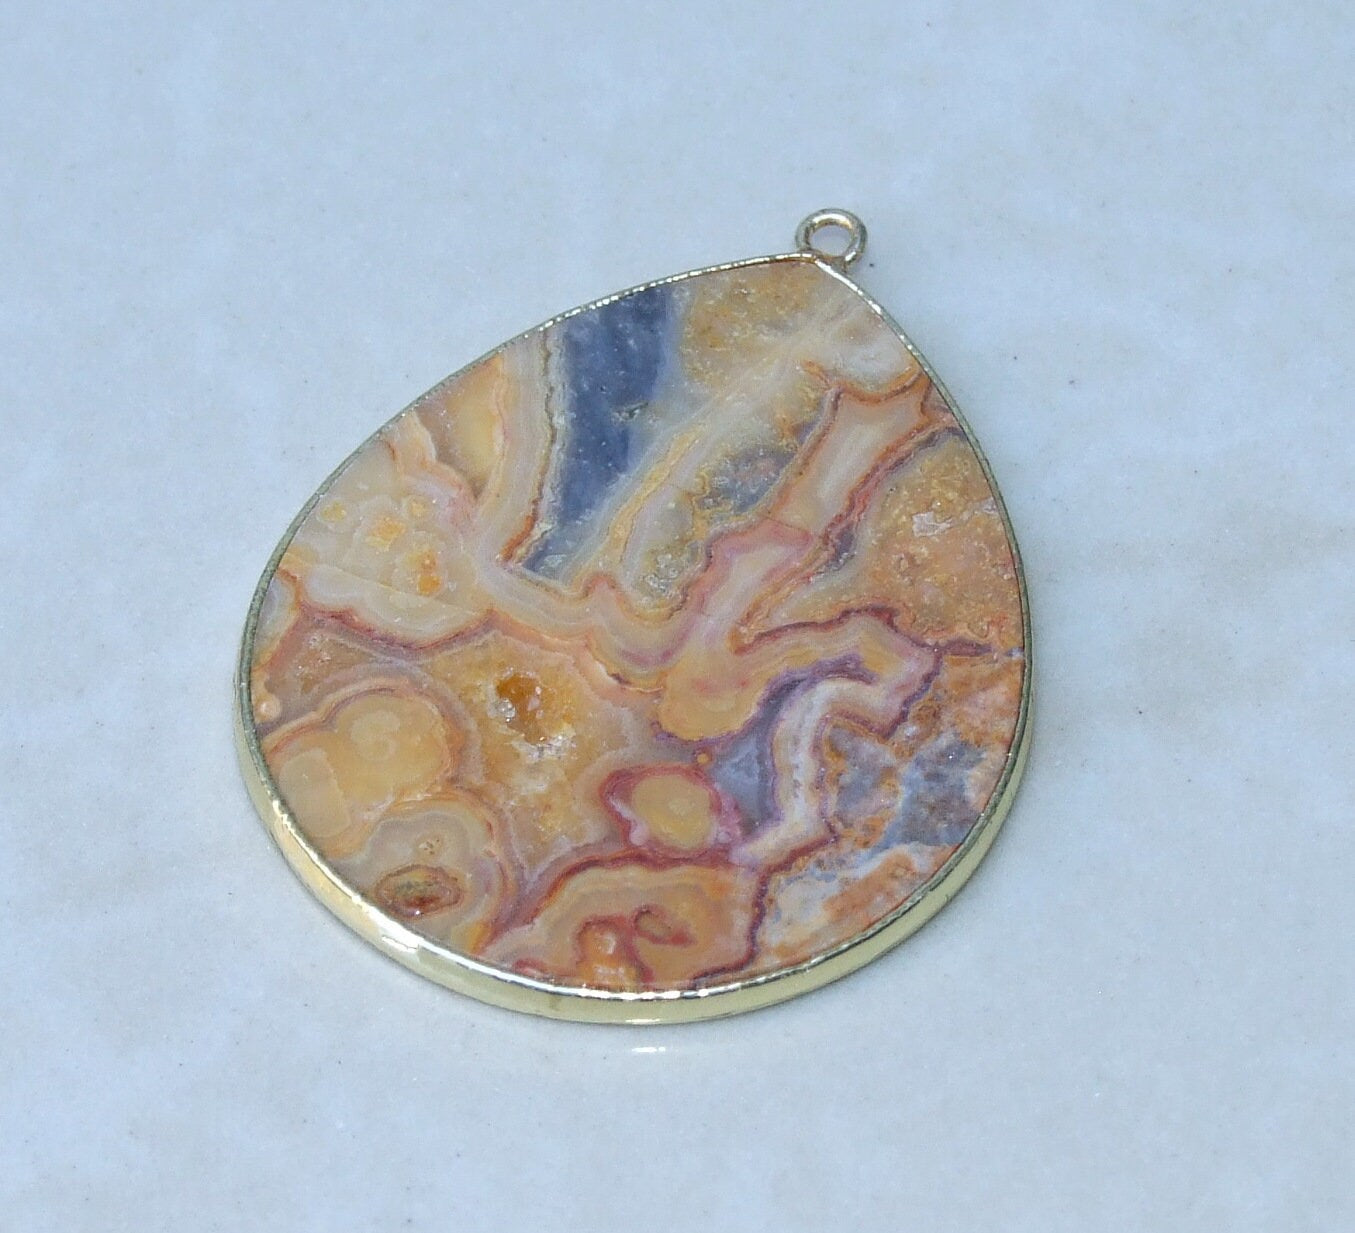 Crazy Lace Agate Pendant, Gemstone Pendant, Mexican Agate, Thin Agate Slice, Polished Agate, Teardrop, Gold Bezel, 30mm x 40mm